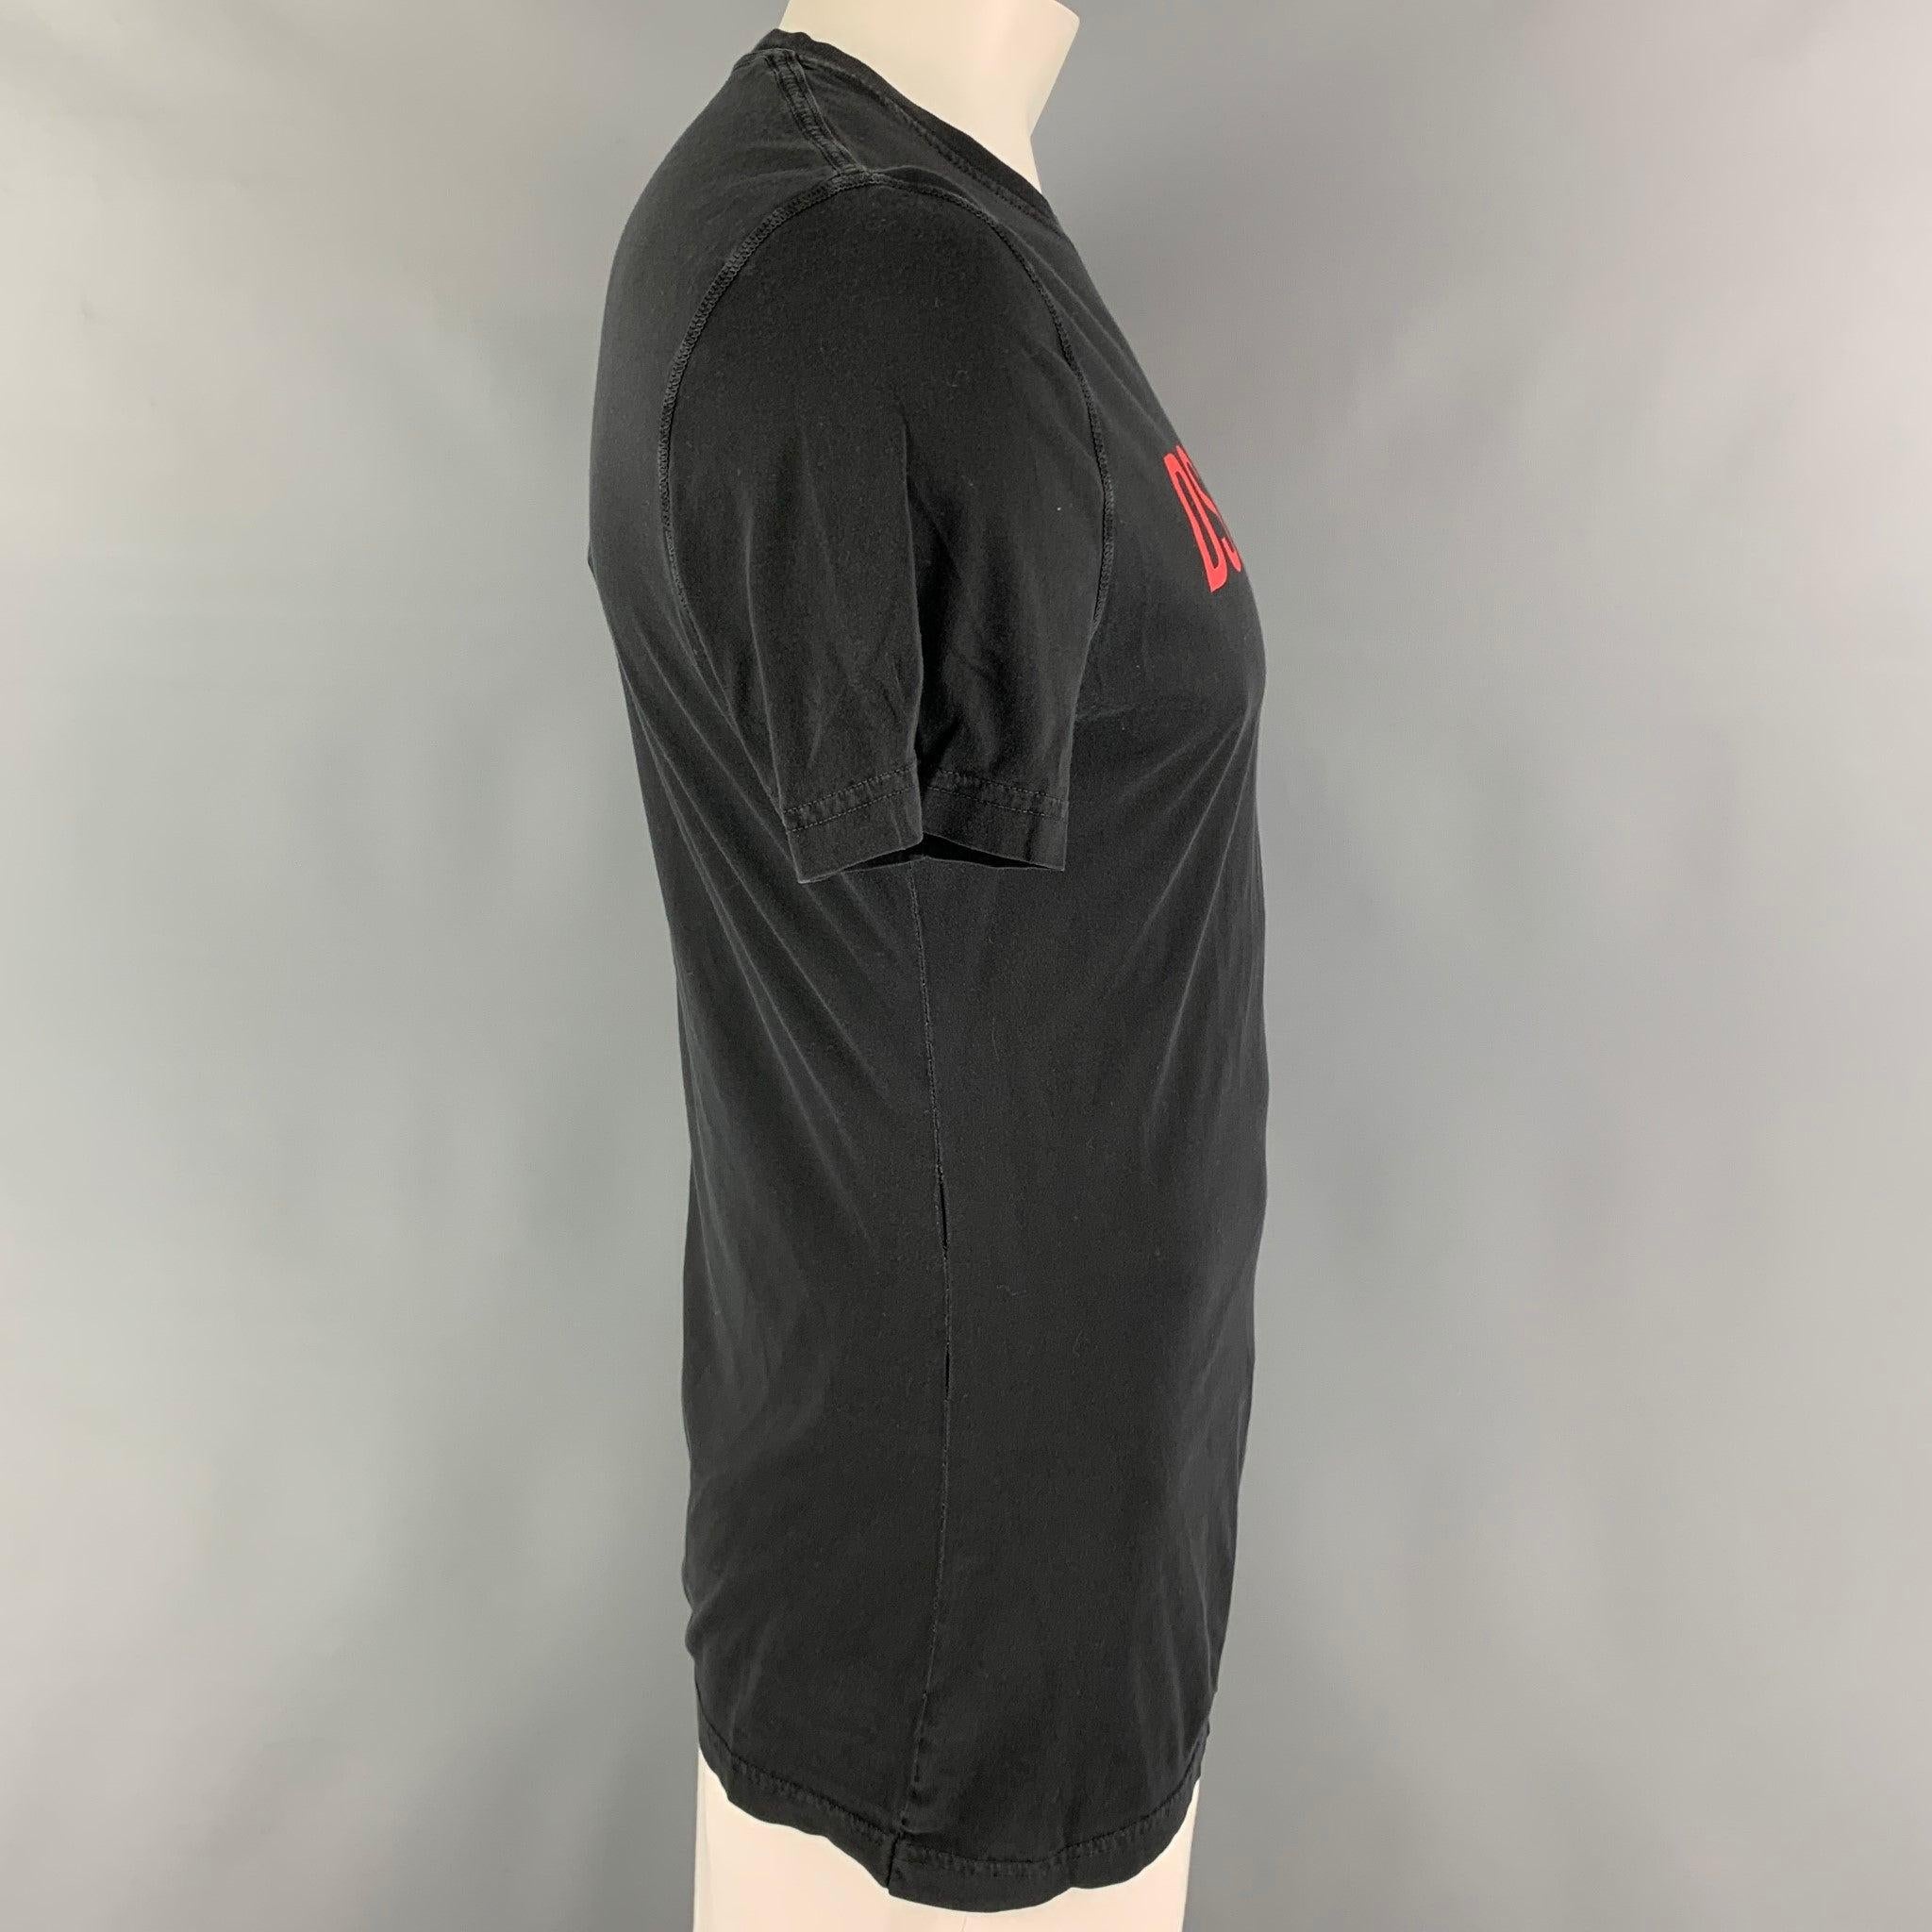 DSQUARED2 t-shirt comes in a black & red cotton featuring a logo design and a crew-neck. Made in Italy.
Very Good
Pre-Owned Condition. 

Marked:   XXL  

Measurements: 
 
Shoulder: 17 inches Chest: 42 inches Sleeve: 9 inches Length: 29 inches 
  
 